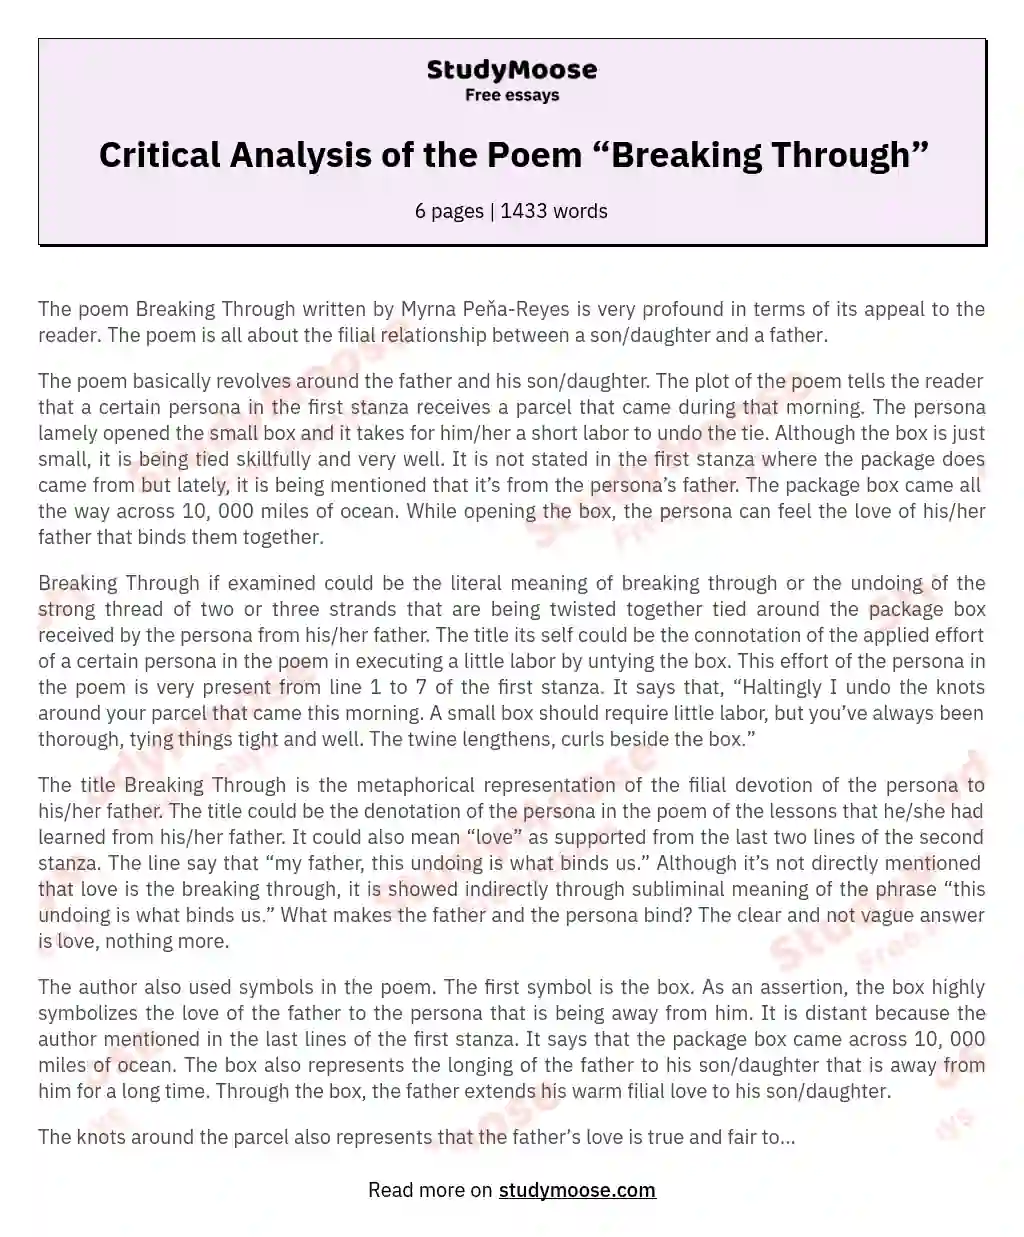 Critical Analysis of the Poem “Breaking Through”